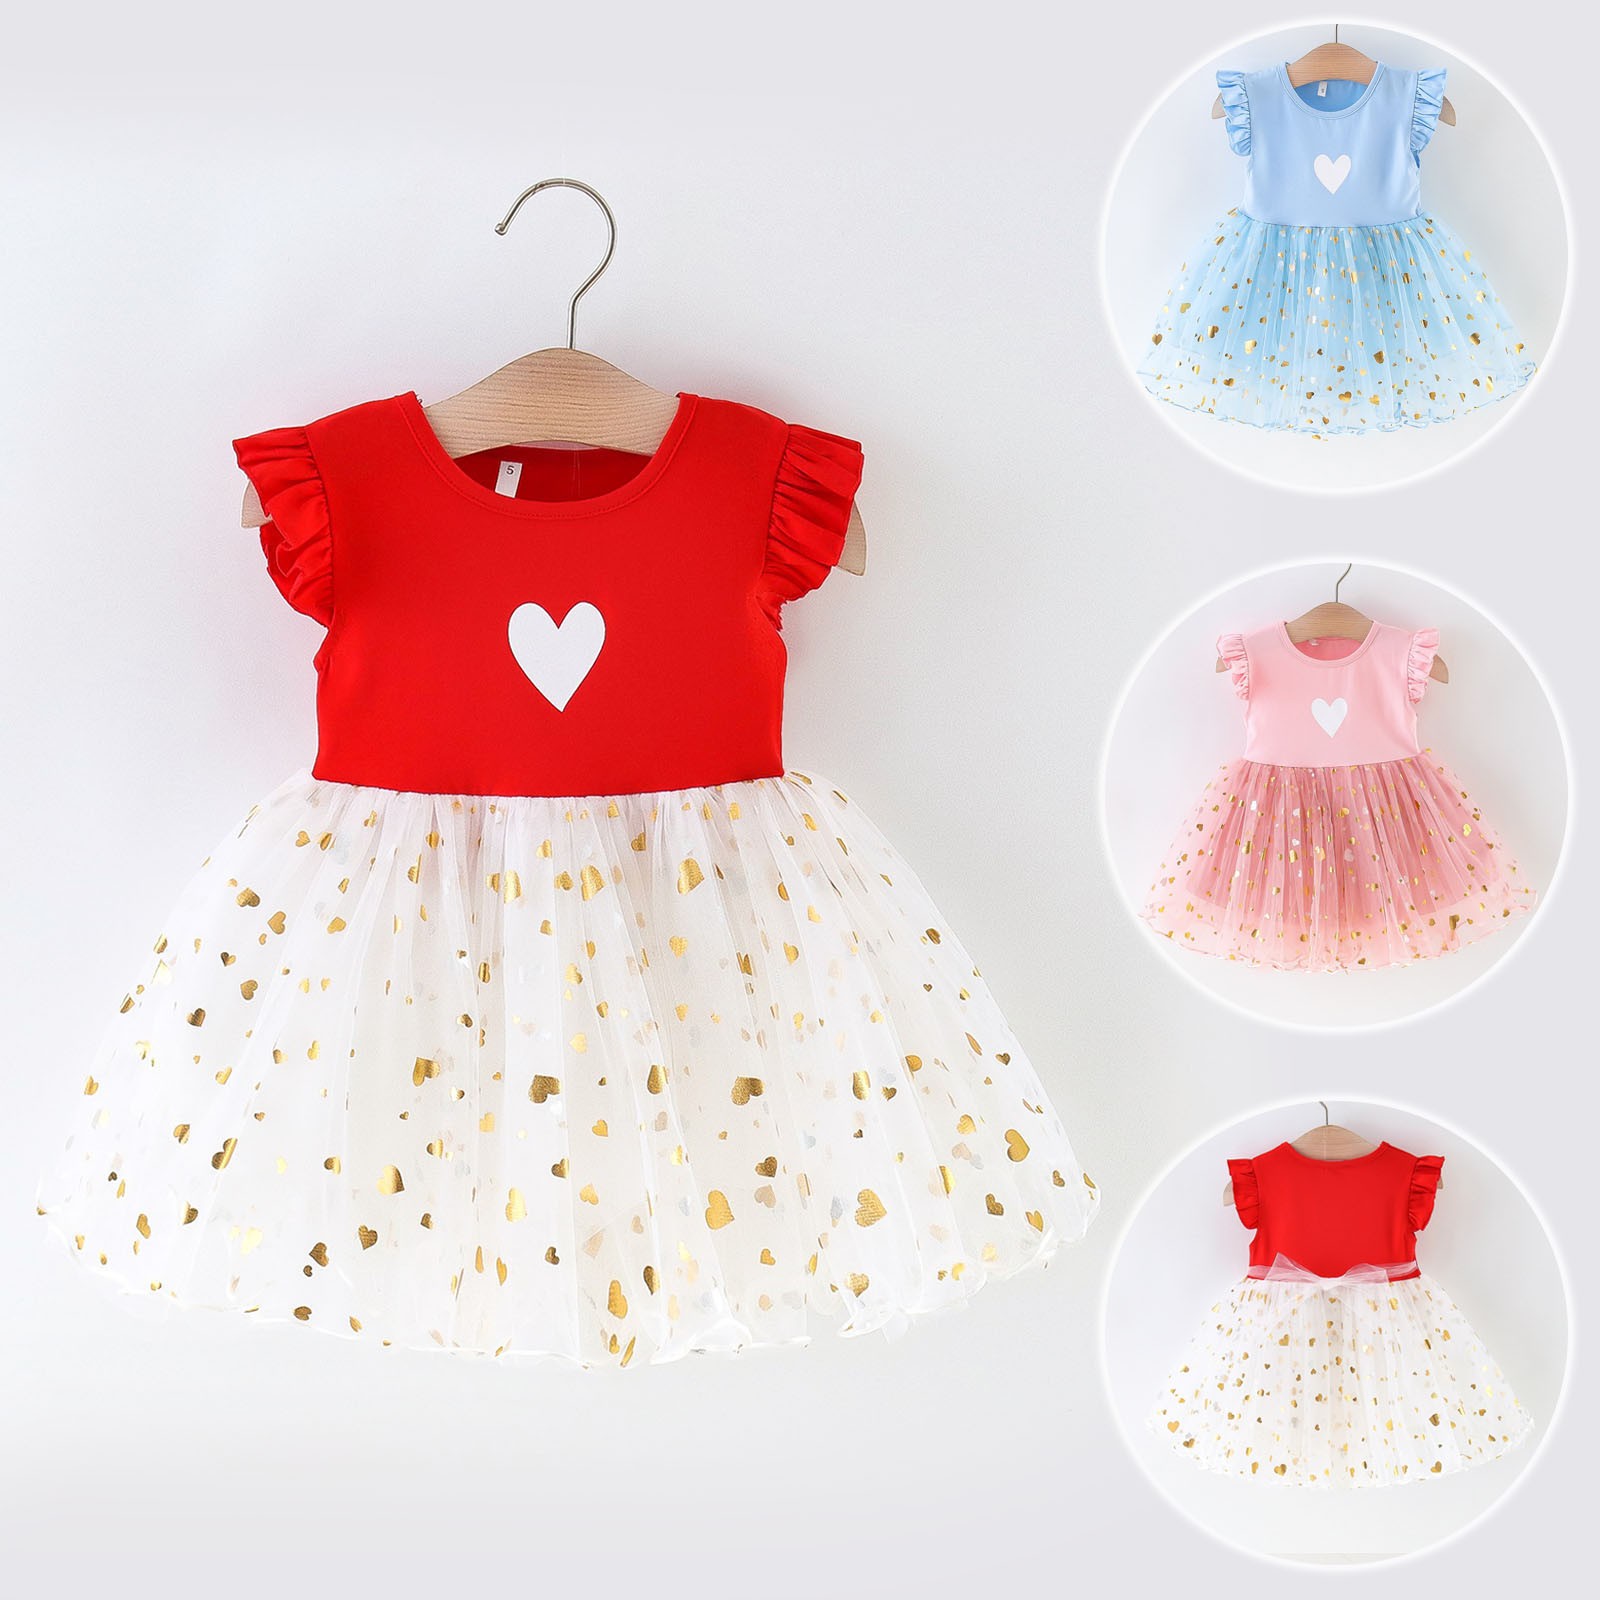 Summer Floral Ruffle Dress Toddler Baby Girls Floral Sleeve Heart Floral Print Dresses Sequins Tulle Princess Dress Party Dress